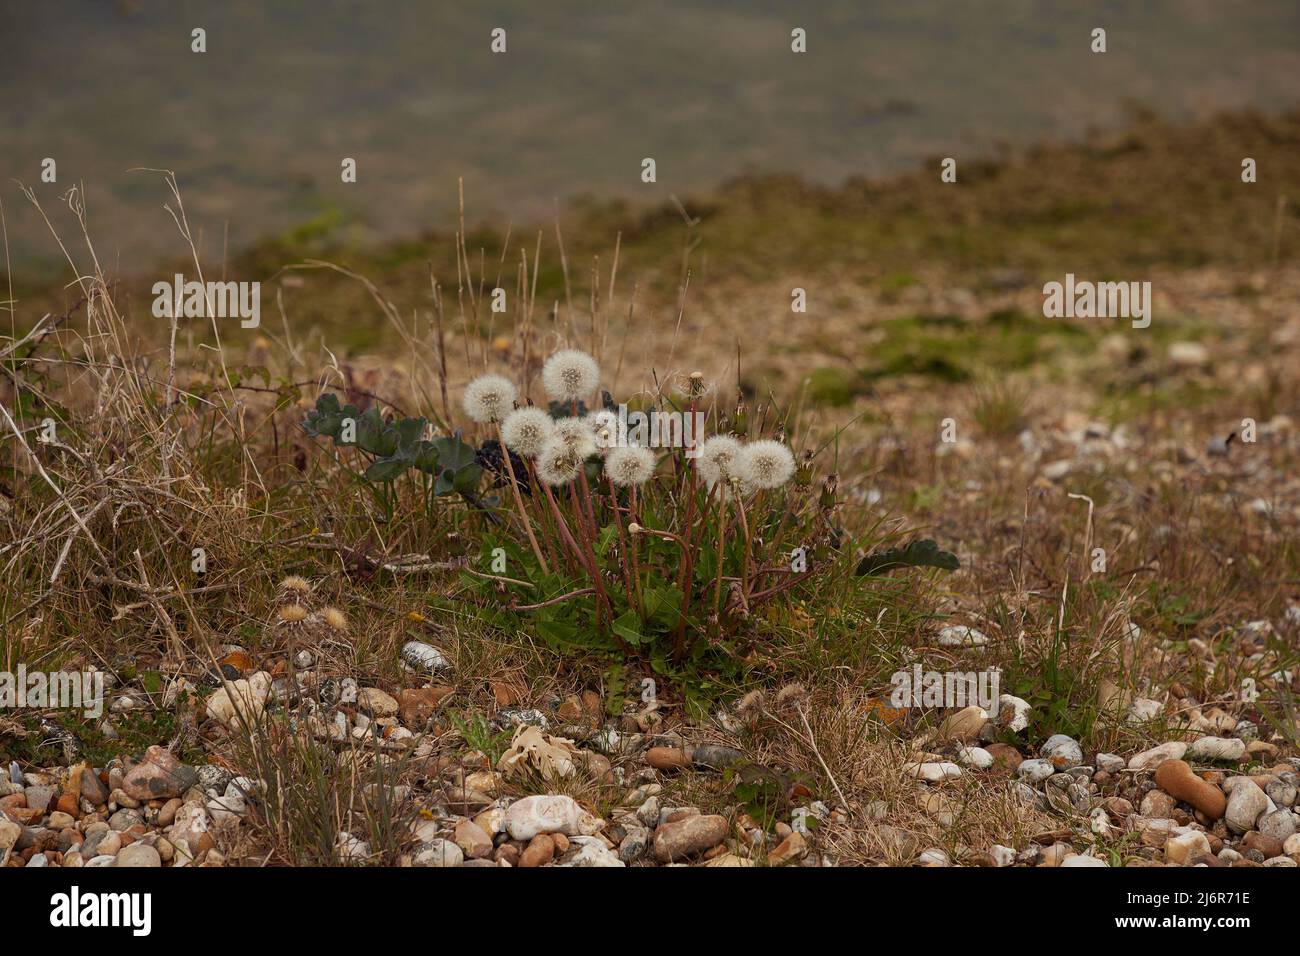 Seedheads of dandelion plants seen in the wild. Stock Photo